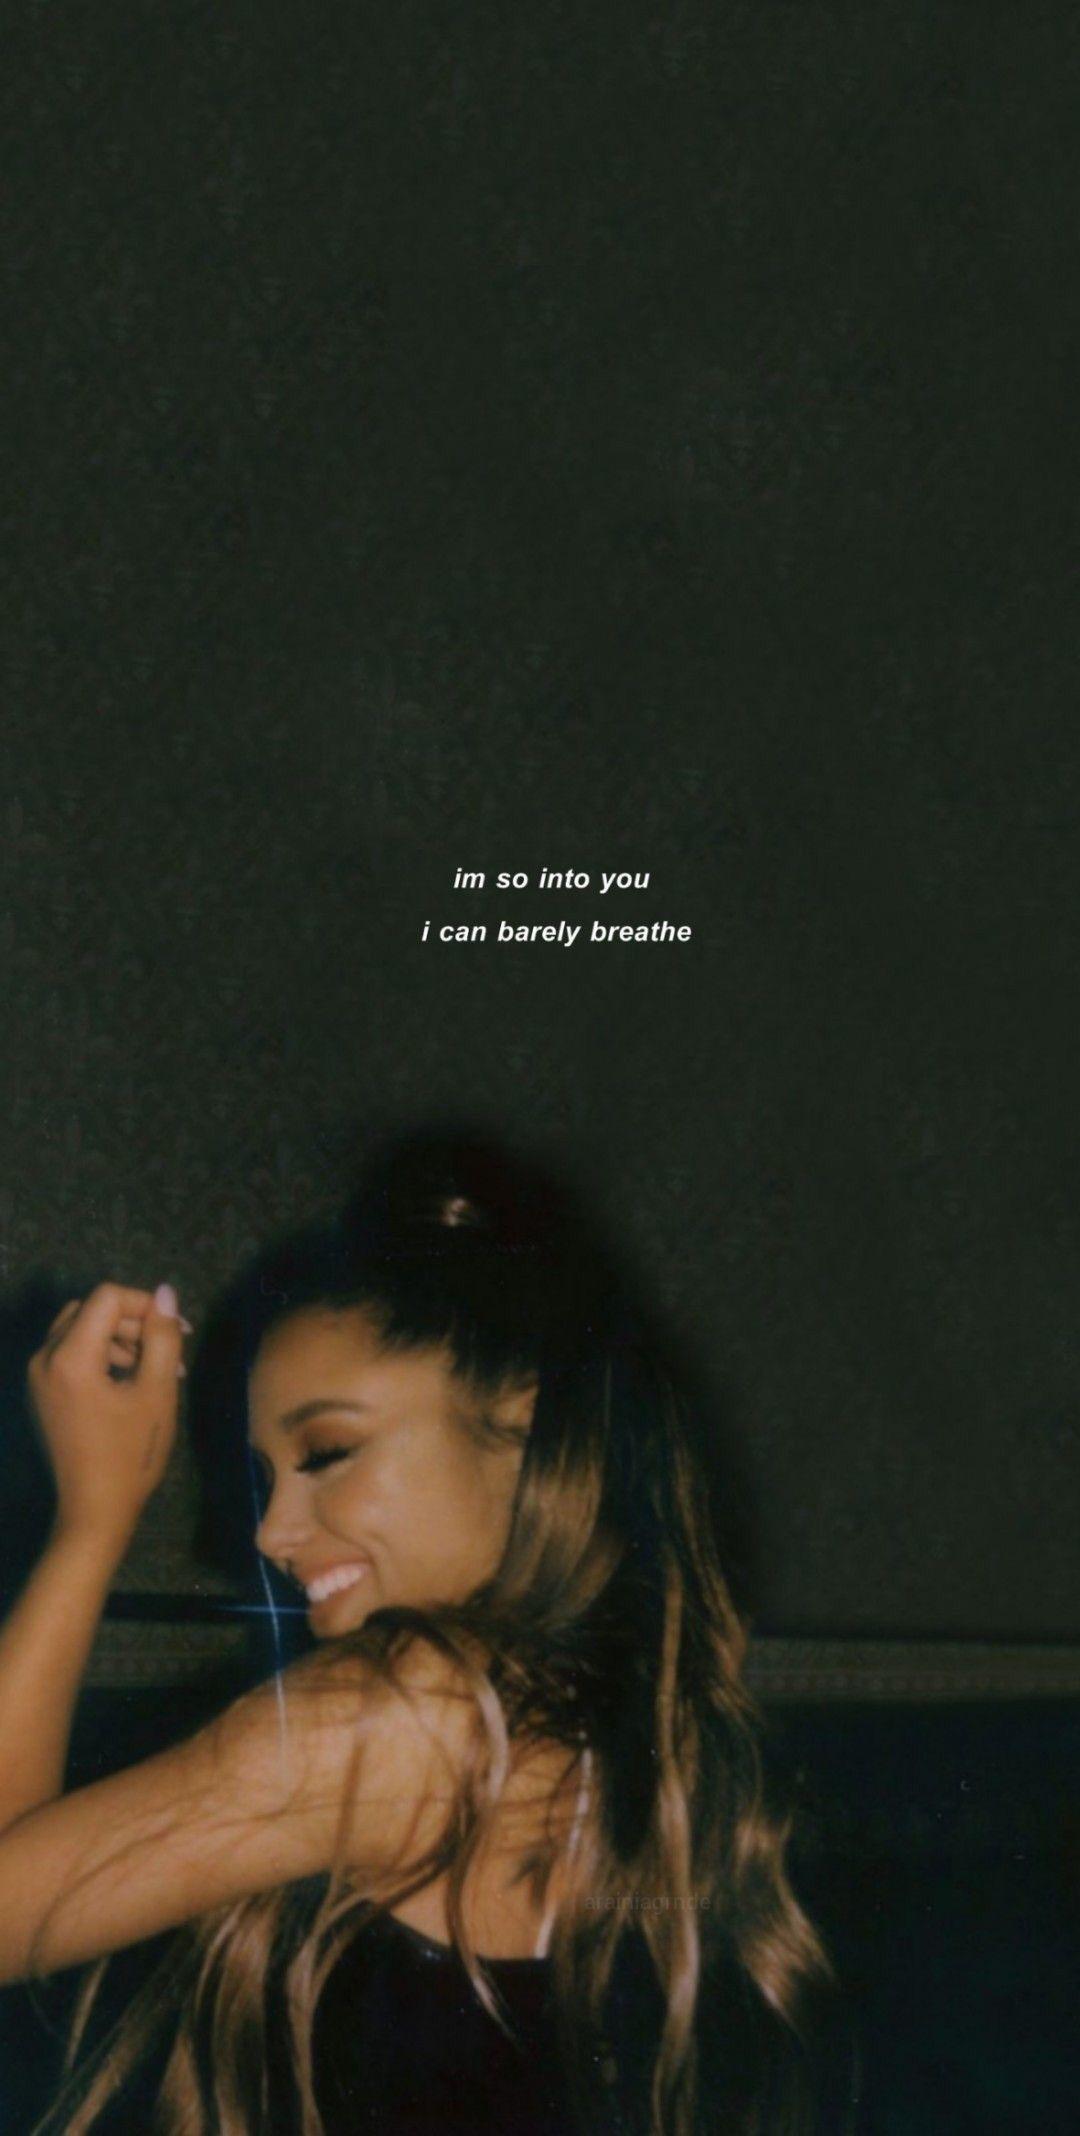 Download Ariana Grande in a vintage-inspired aesthetic setting Wallpaper